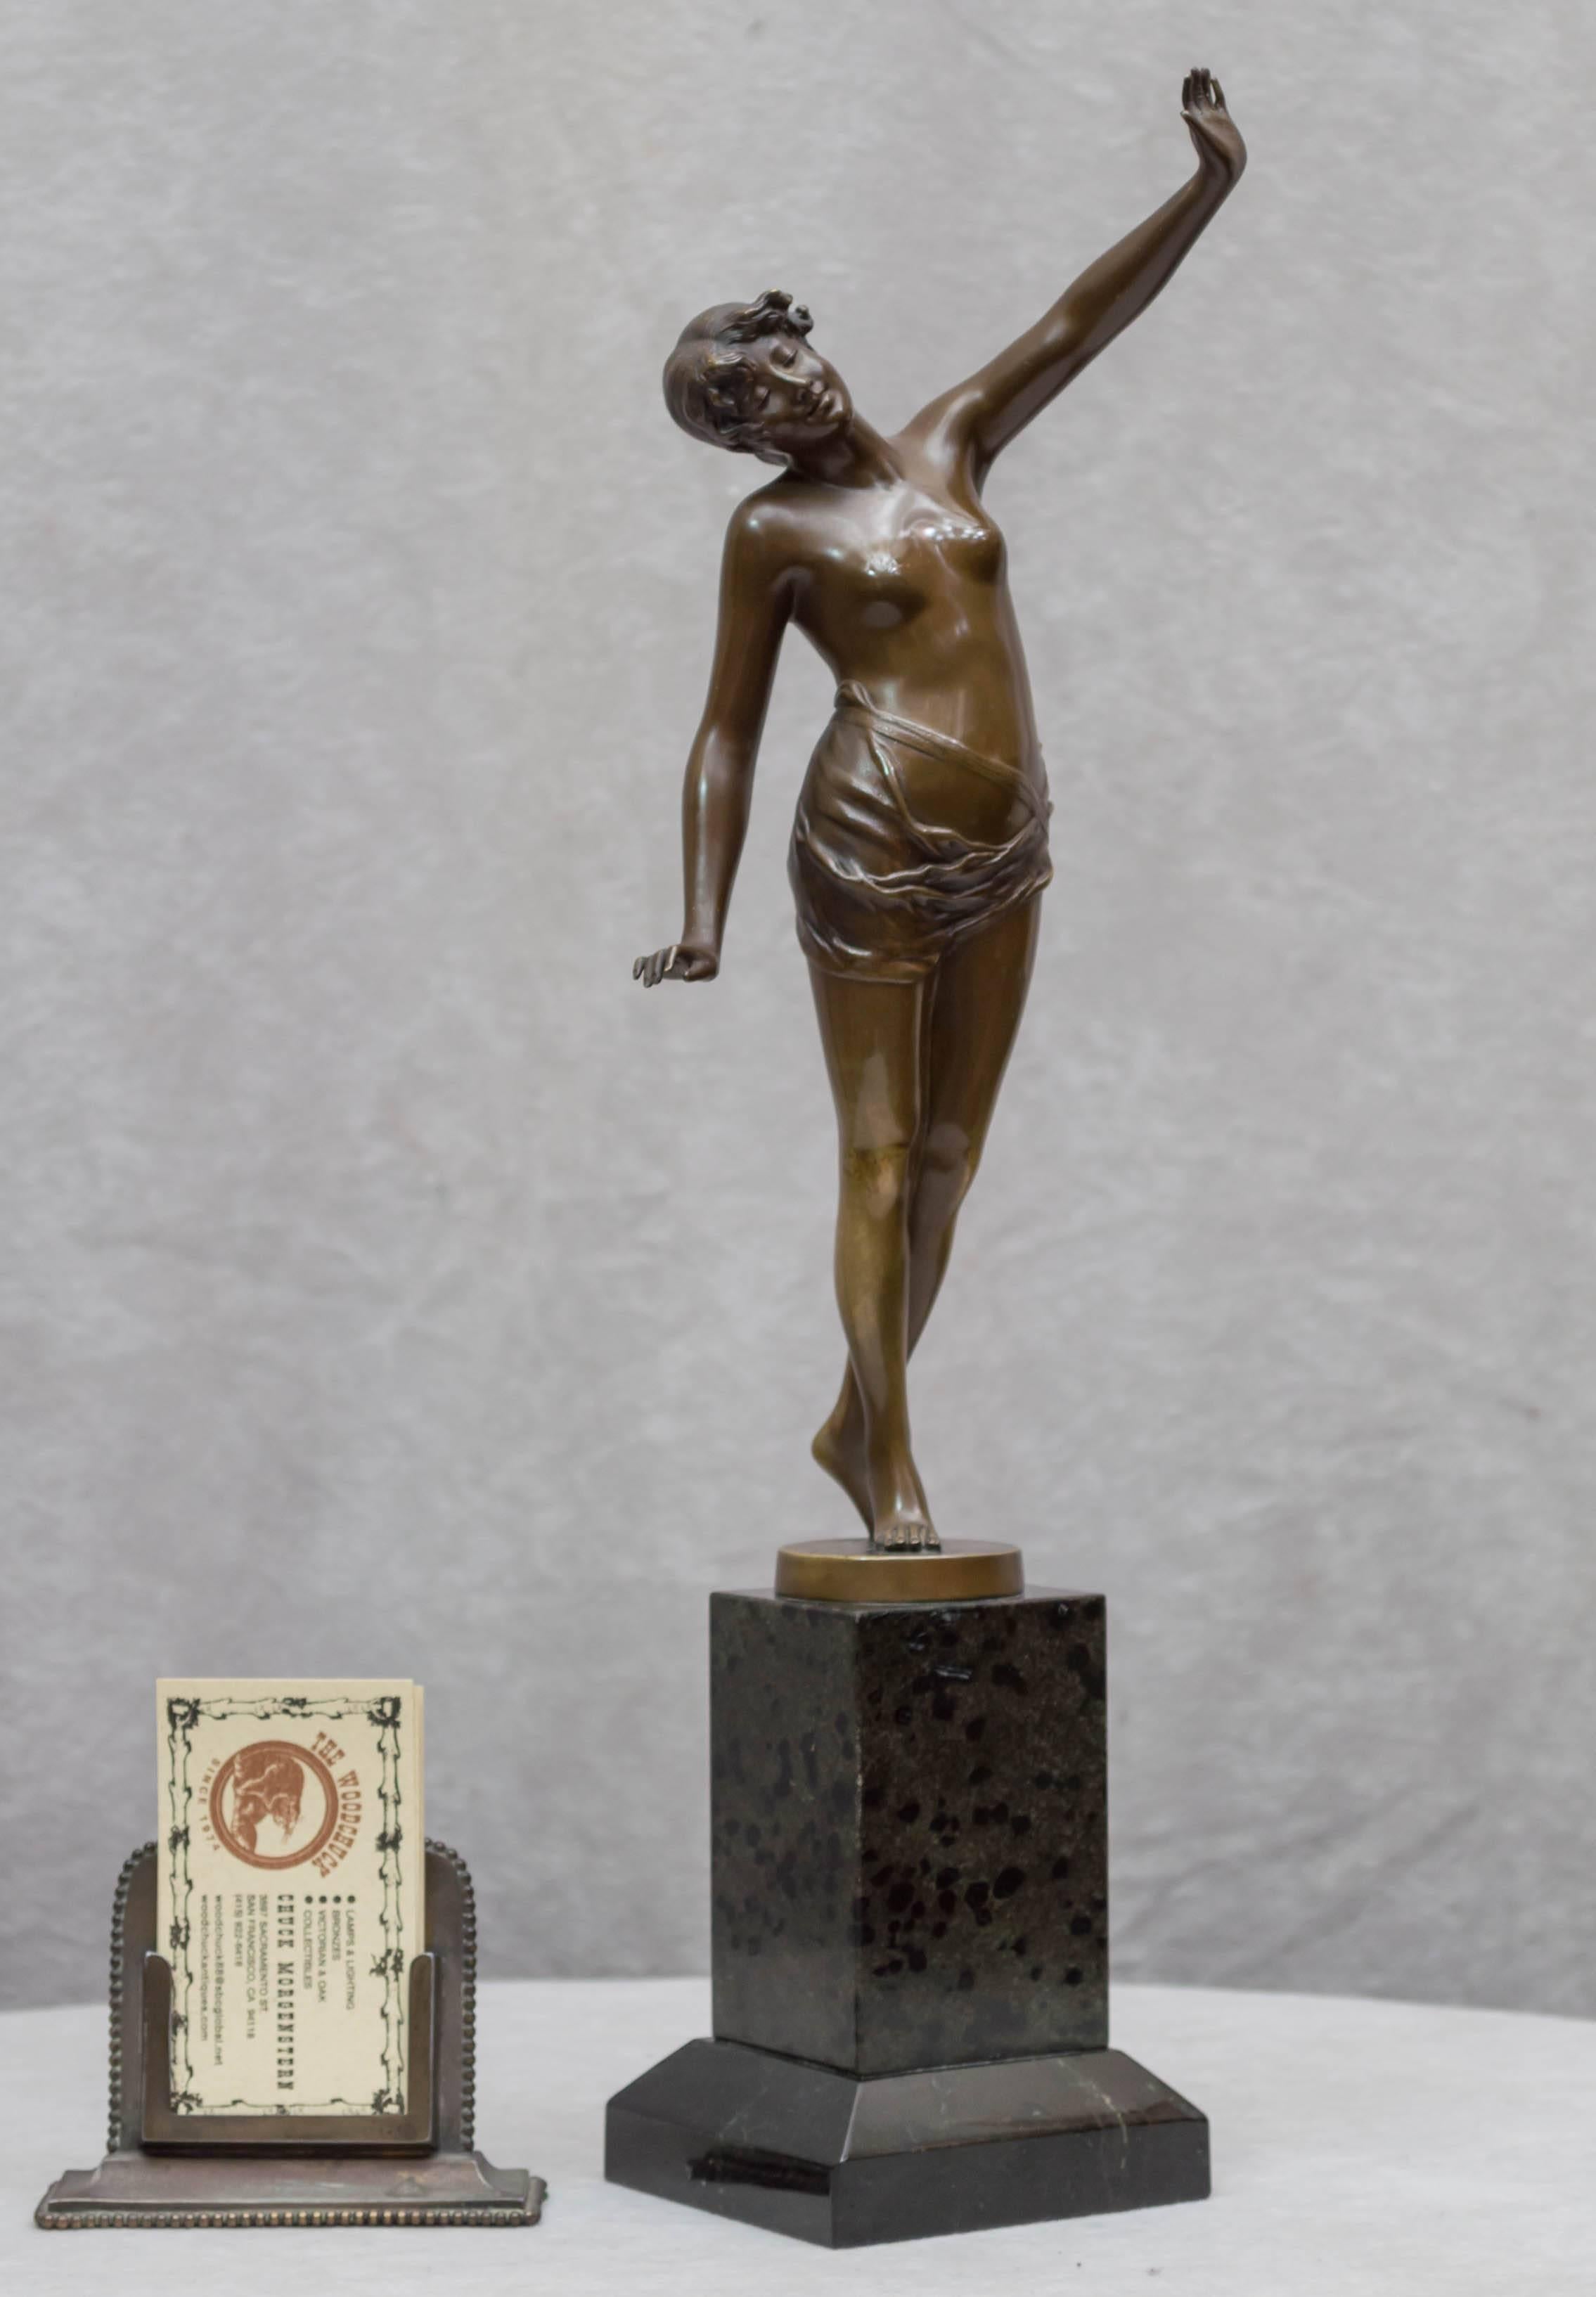 This lovely bronze nude has all the beauty that can be employed to make a fine sculpture. She has a graceful pose, a joyful and beautiful smiling face, and a shapely body. The patina is rich and warm, and the marble is high quality. The only thing